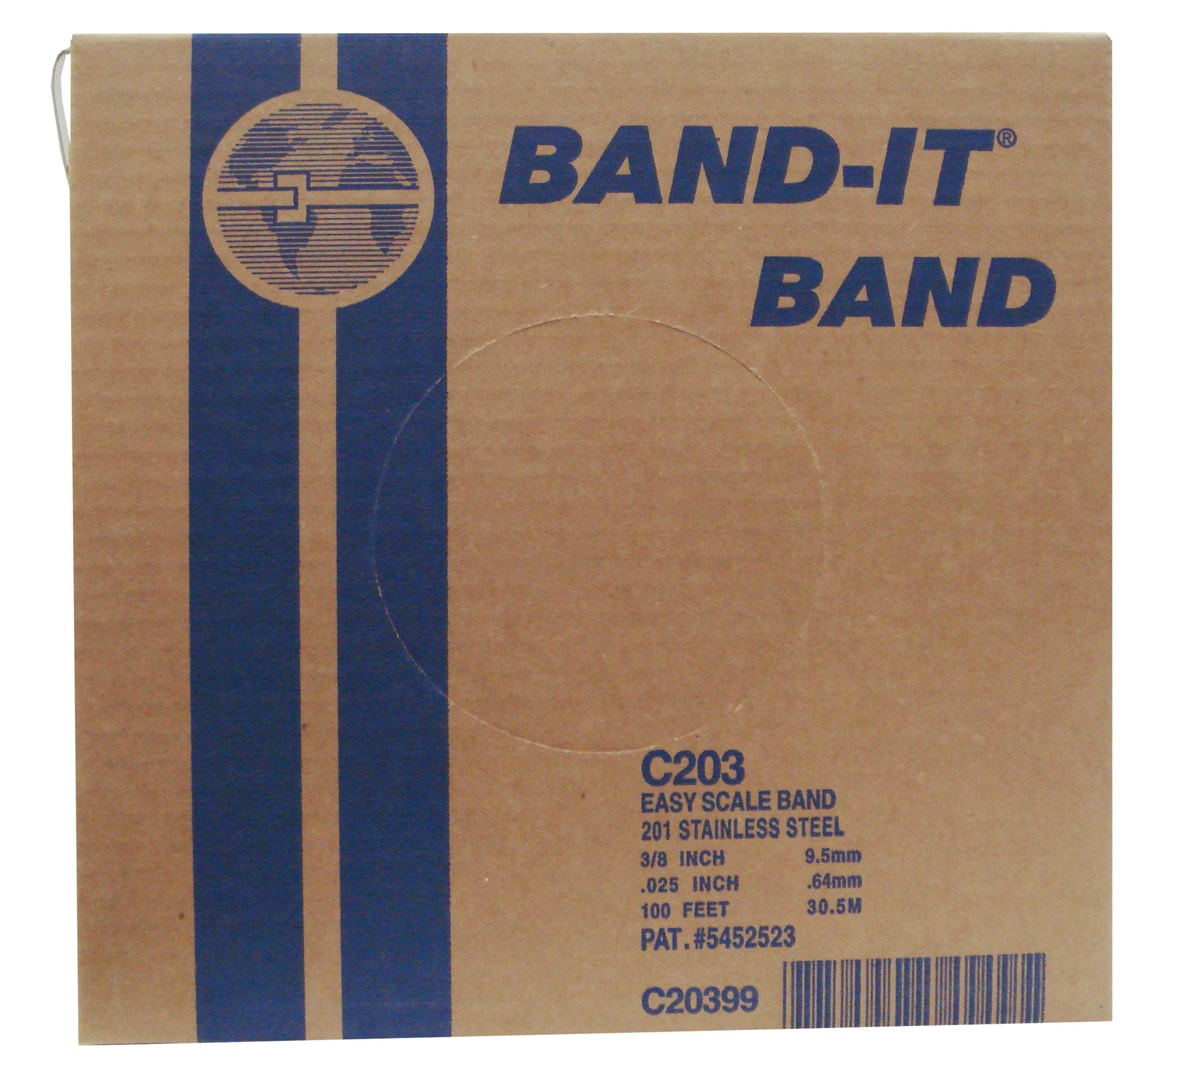 BAND-IT C206, Band Stainless Steel 3/4 19.05mm